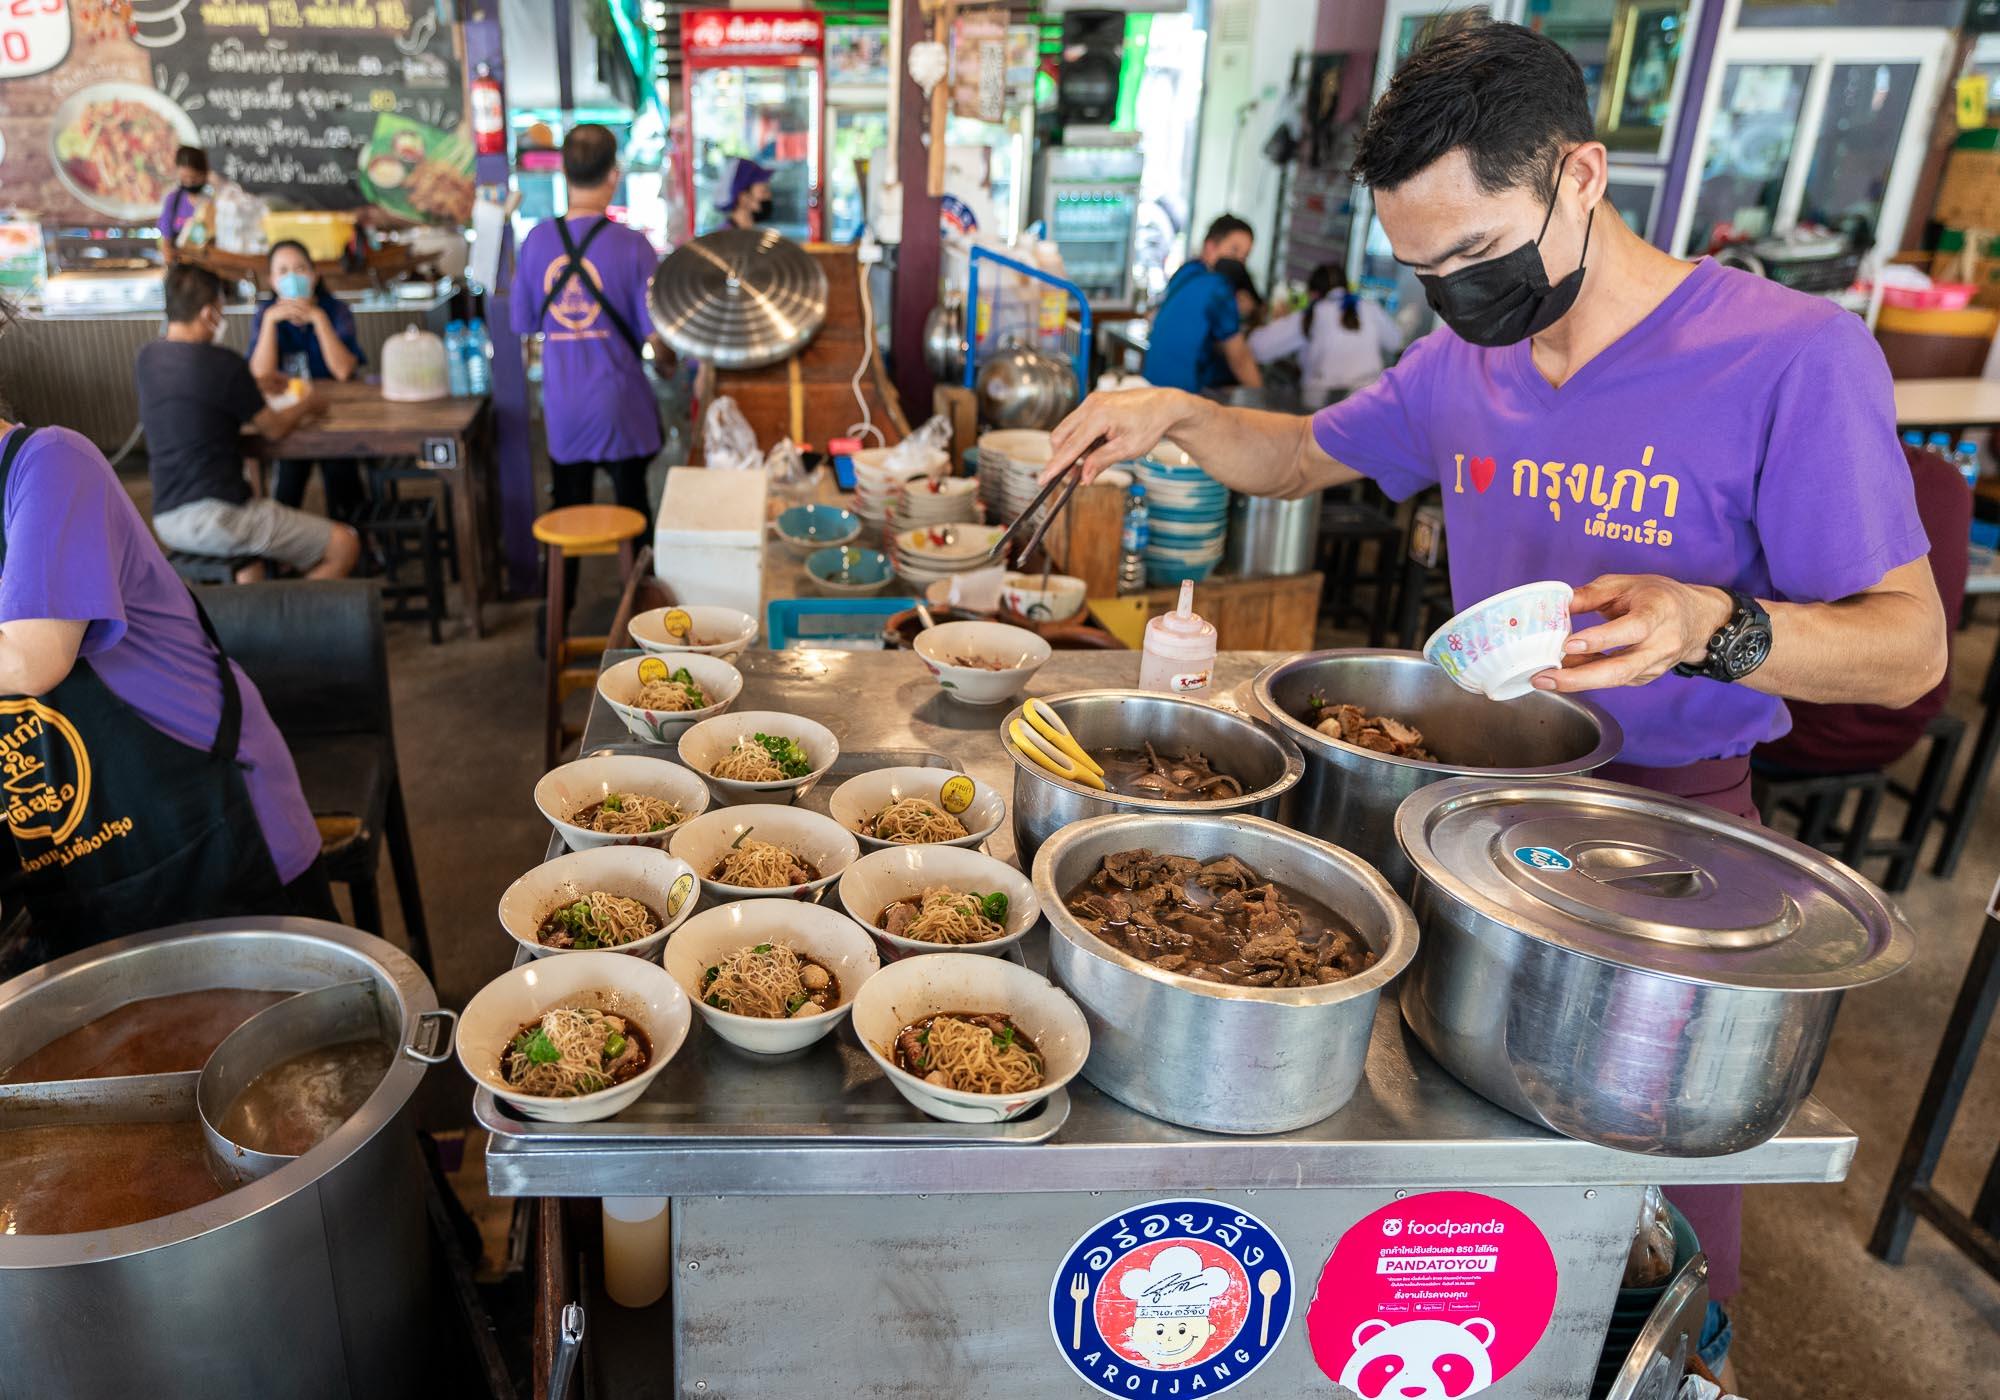 Boat noodles are still served in small bowls as they were traditionally so they didn't spill as they were handed over. – © Michael Turtle